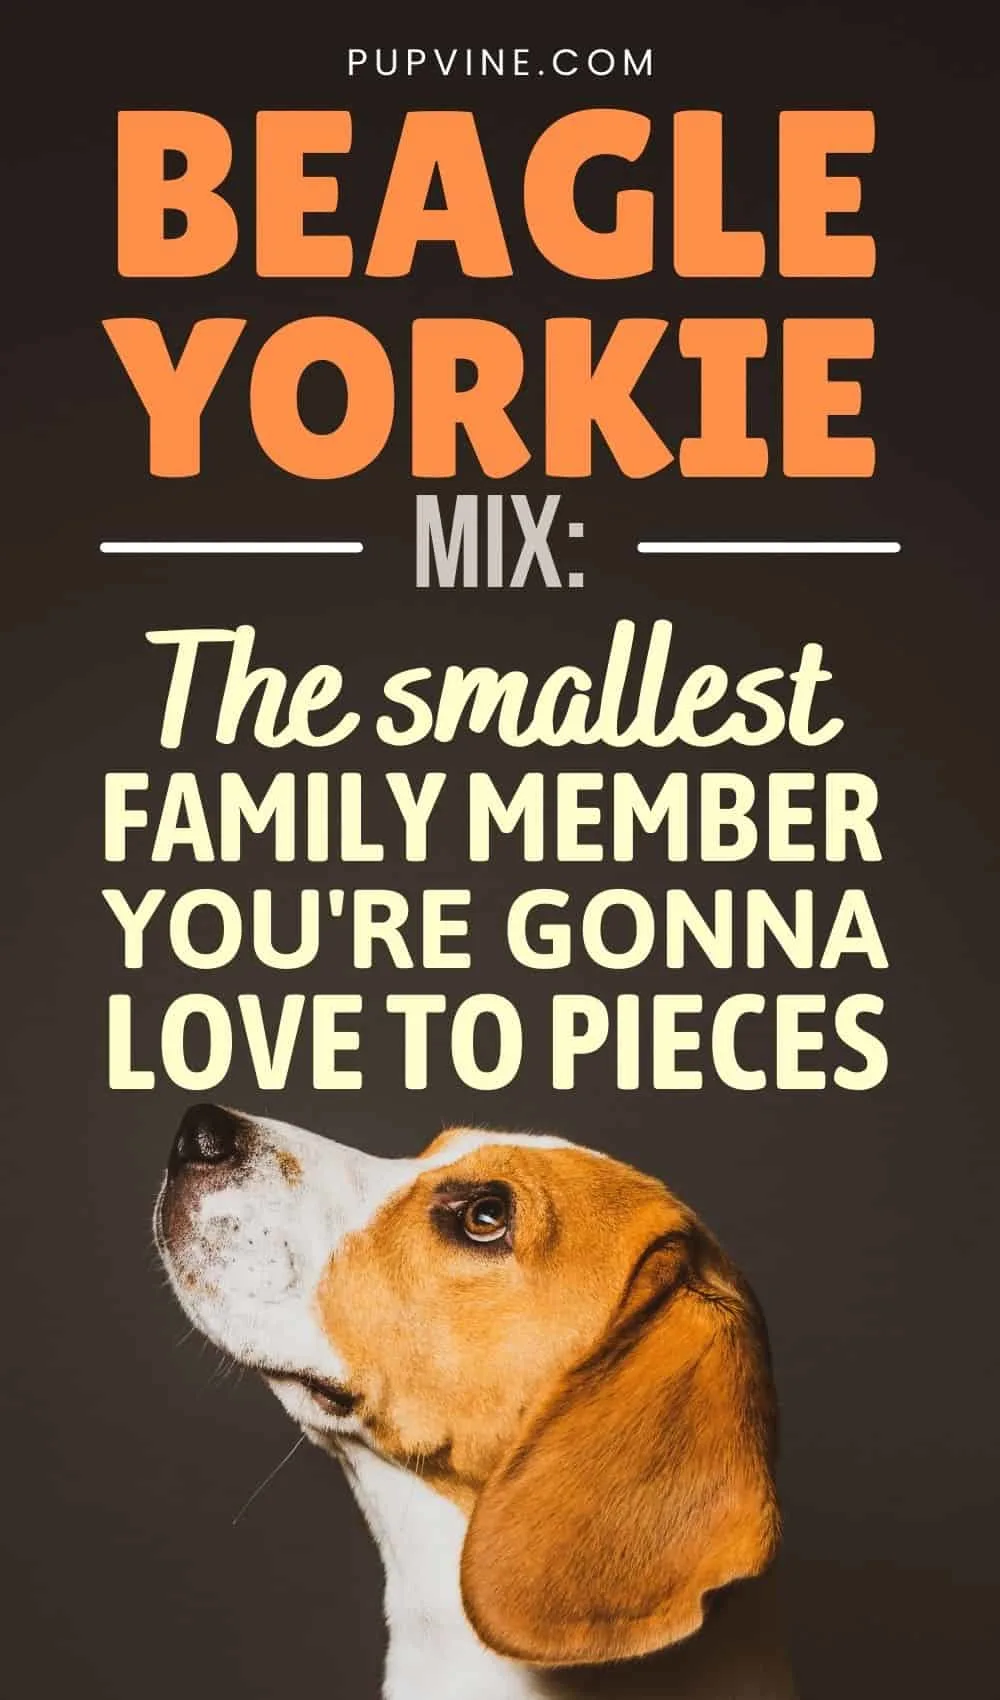 Beagle Yorkie Mix: The Smallest Family Member You're Gonna Love To Pieces